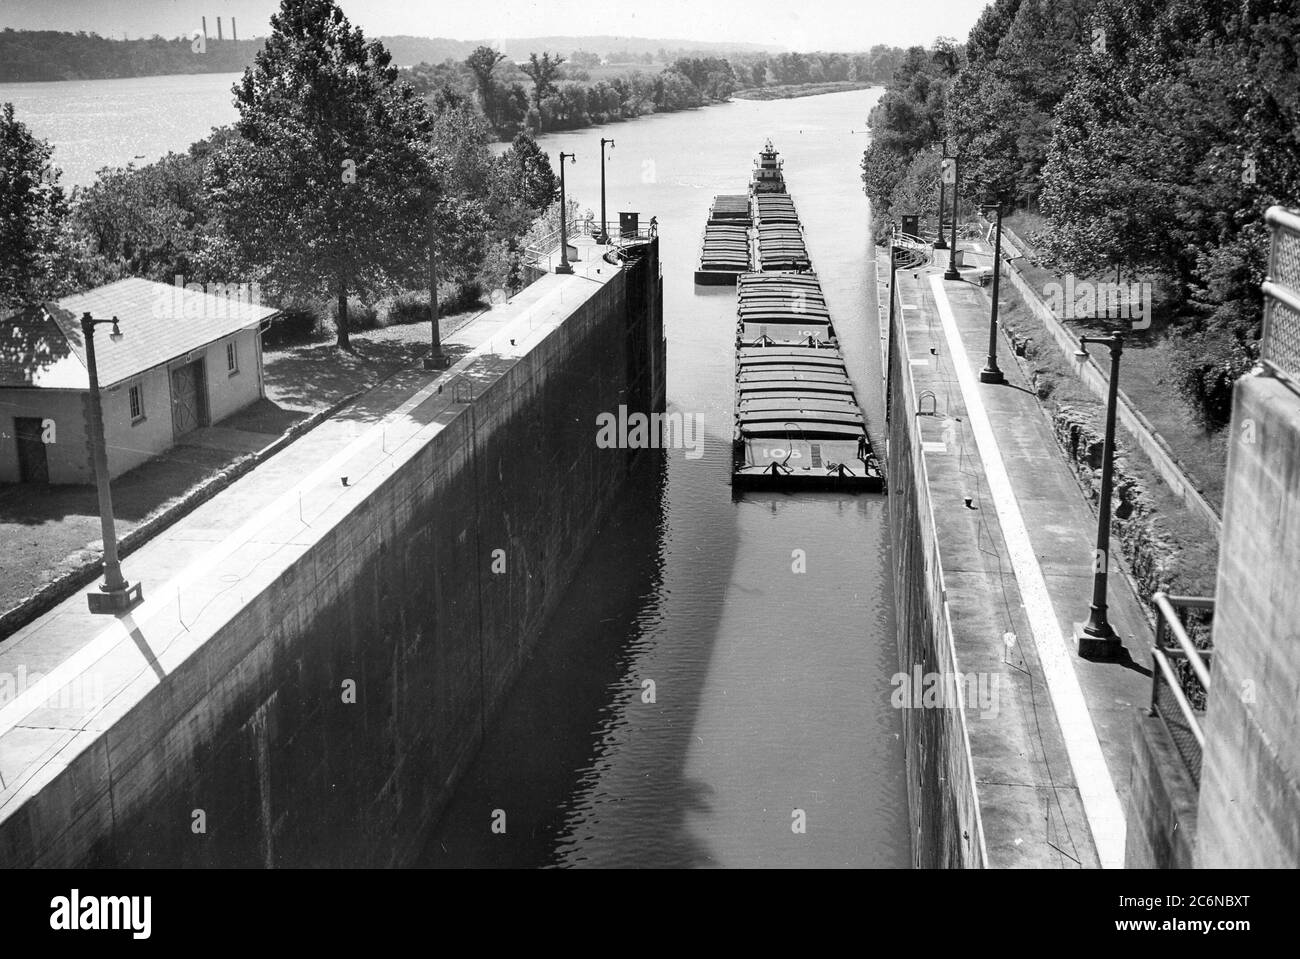 Arrow Transportation Company's diesel towboat ATCO enters Wilson Lock Oct. 5, 1946 at Tennessee River mile 259.4 in Florence, Ala.  The six bargers contained approximately 4,000 tons of grain from St. Louis, Mo., headed to Decatur and Guntersville, Ala. The U.S. Army Corps of Engineers Nashville District operate and maintain the lock at the Tennessee Valley Authority project Stock Photo